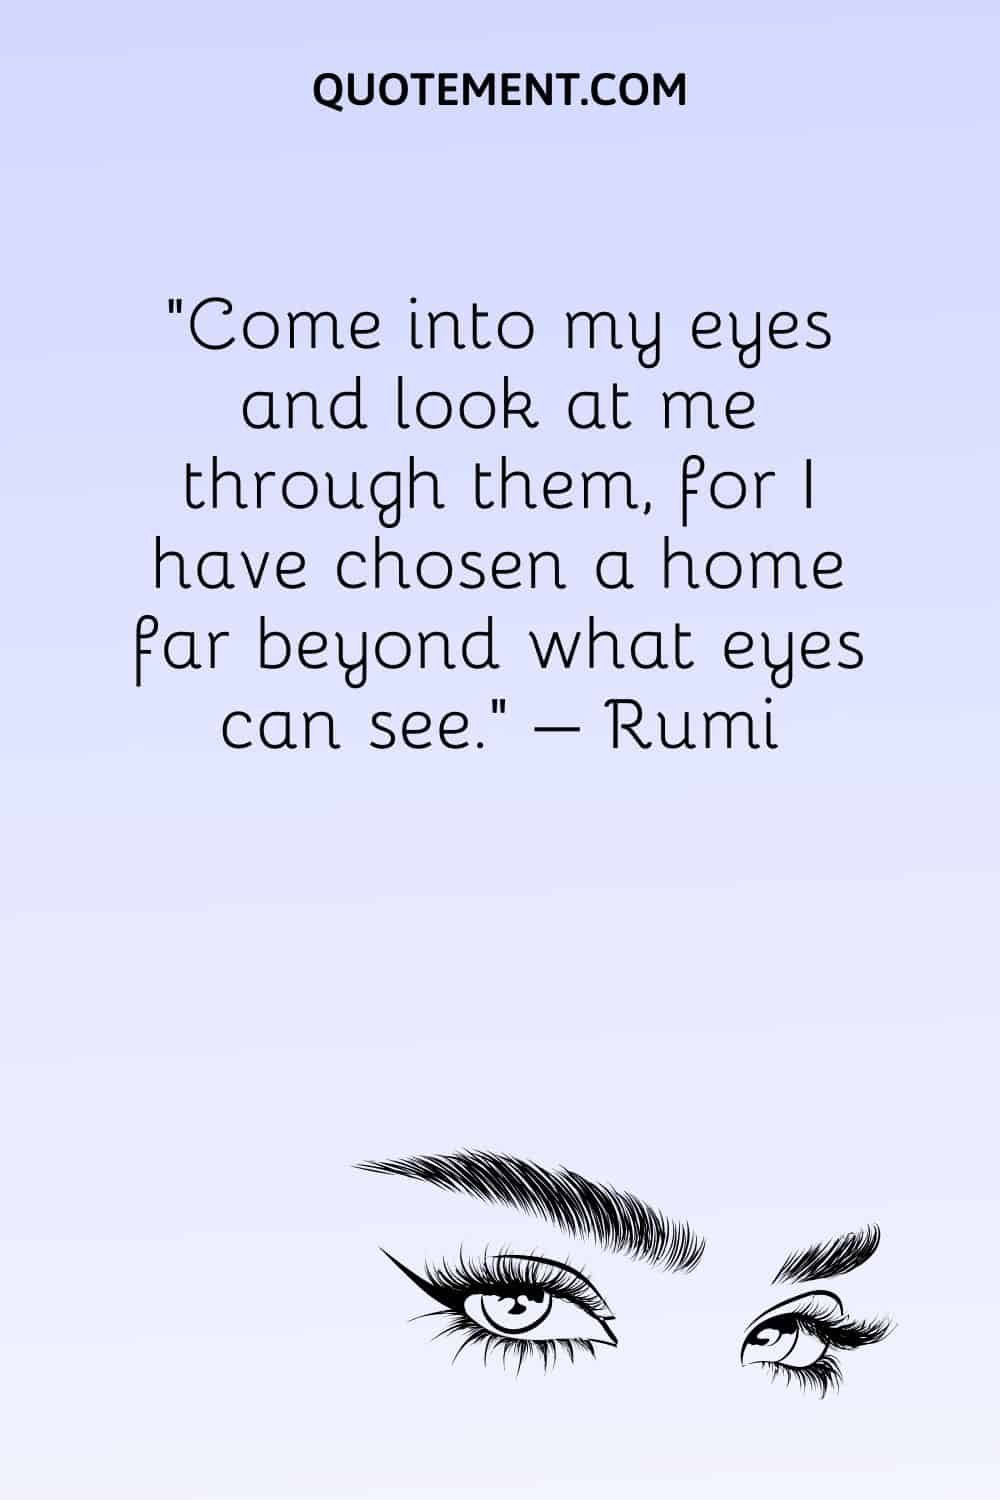 Come into my eyes and look at me through them, for I have chosen a home far beyond what eyes can see.